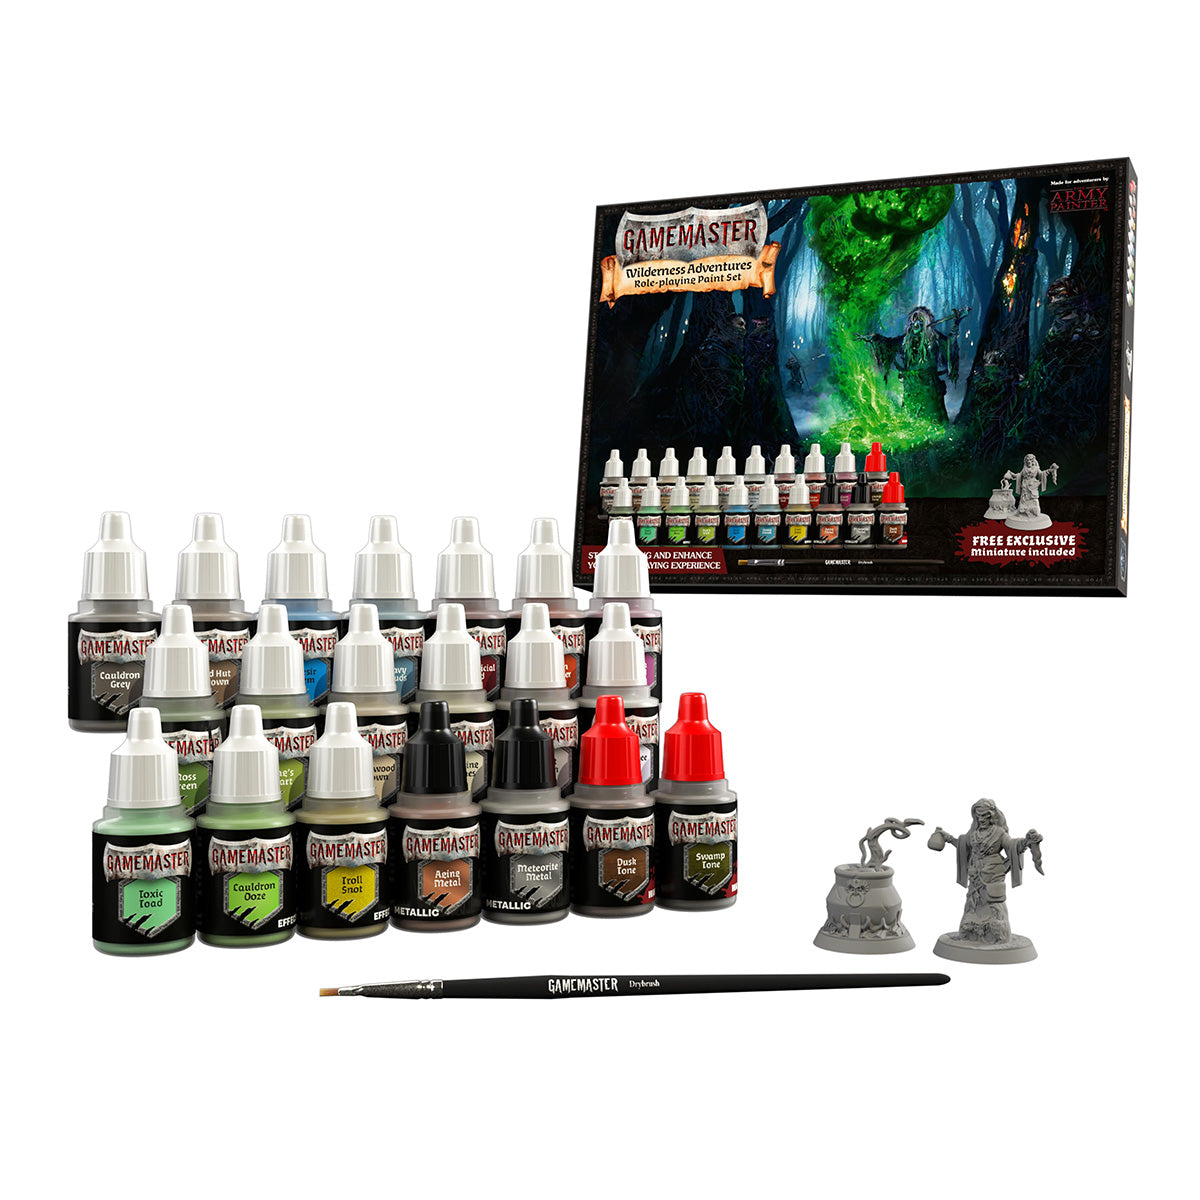 Army Painter Wargaming Set - Gamescape North